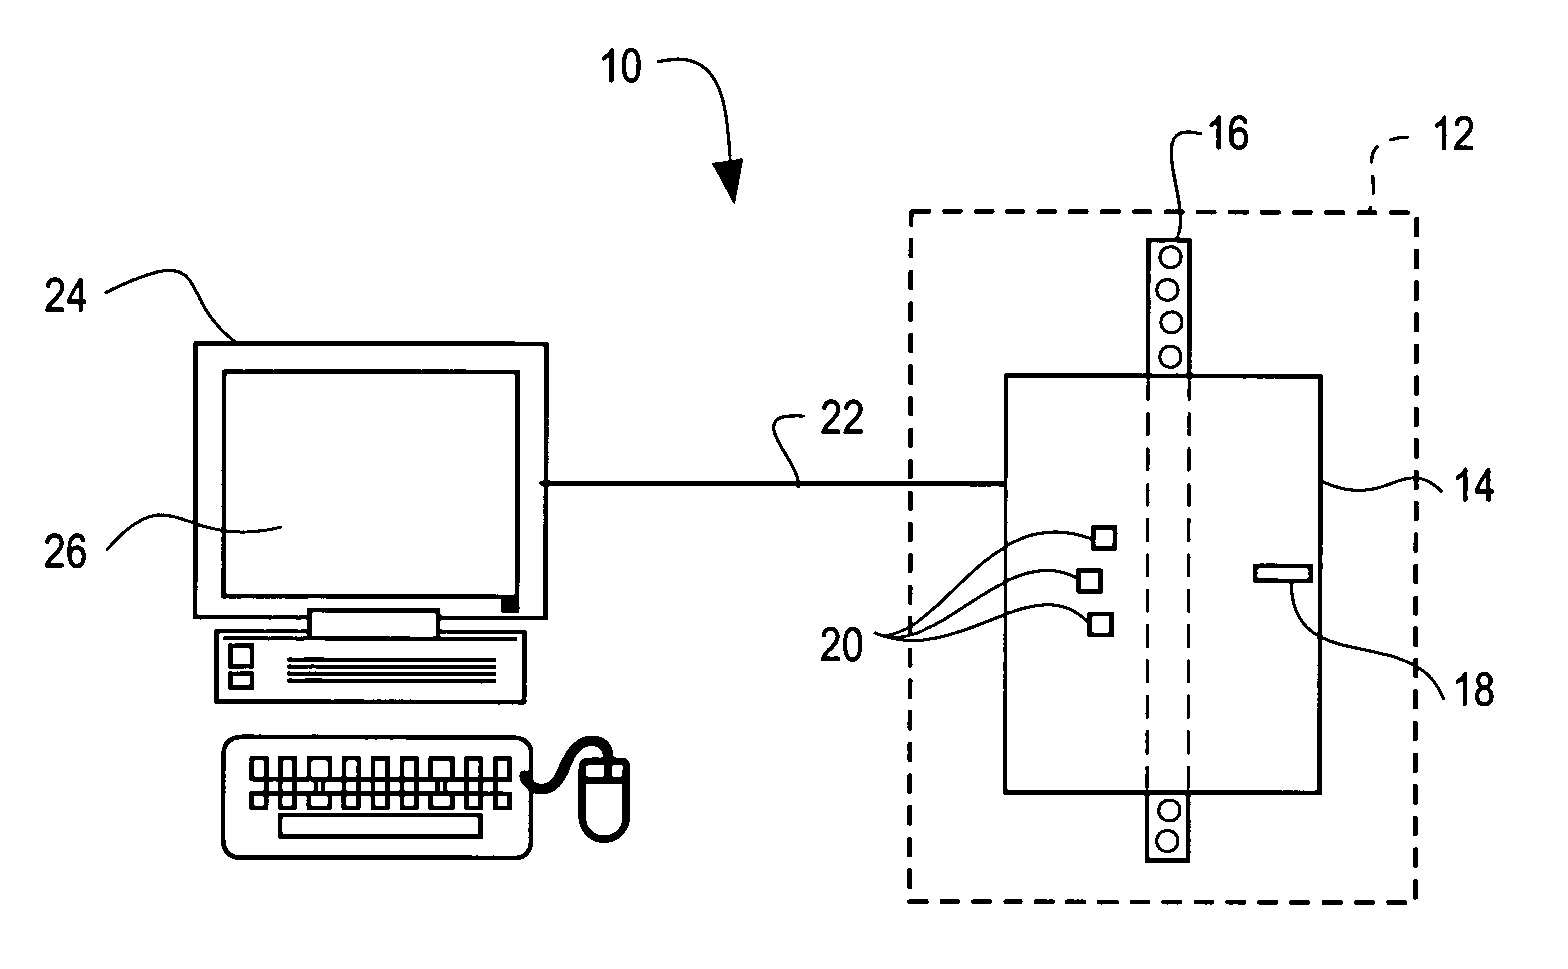 Methods for identifying discrete populations (e.g., clusters) of data within a flow cytometer multi-dimensional data set